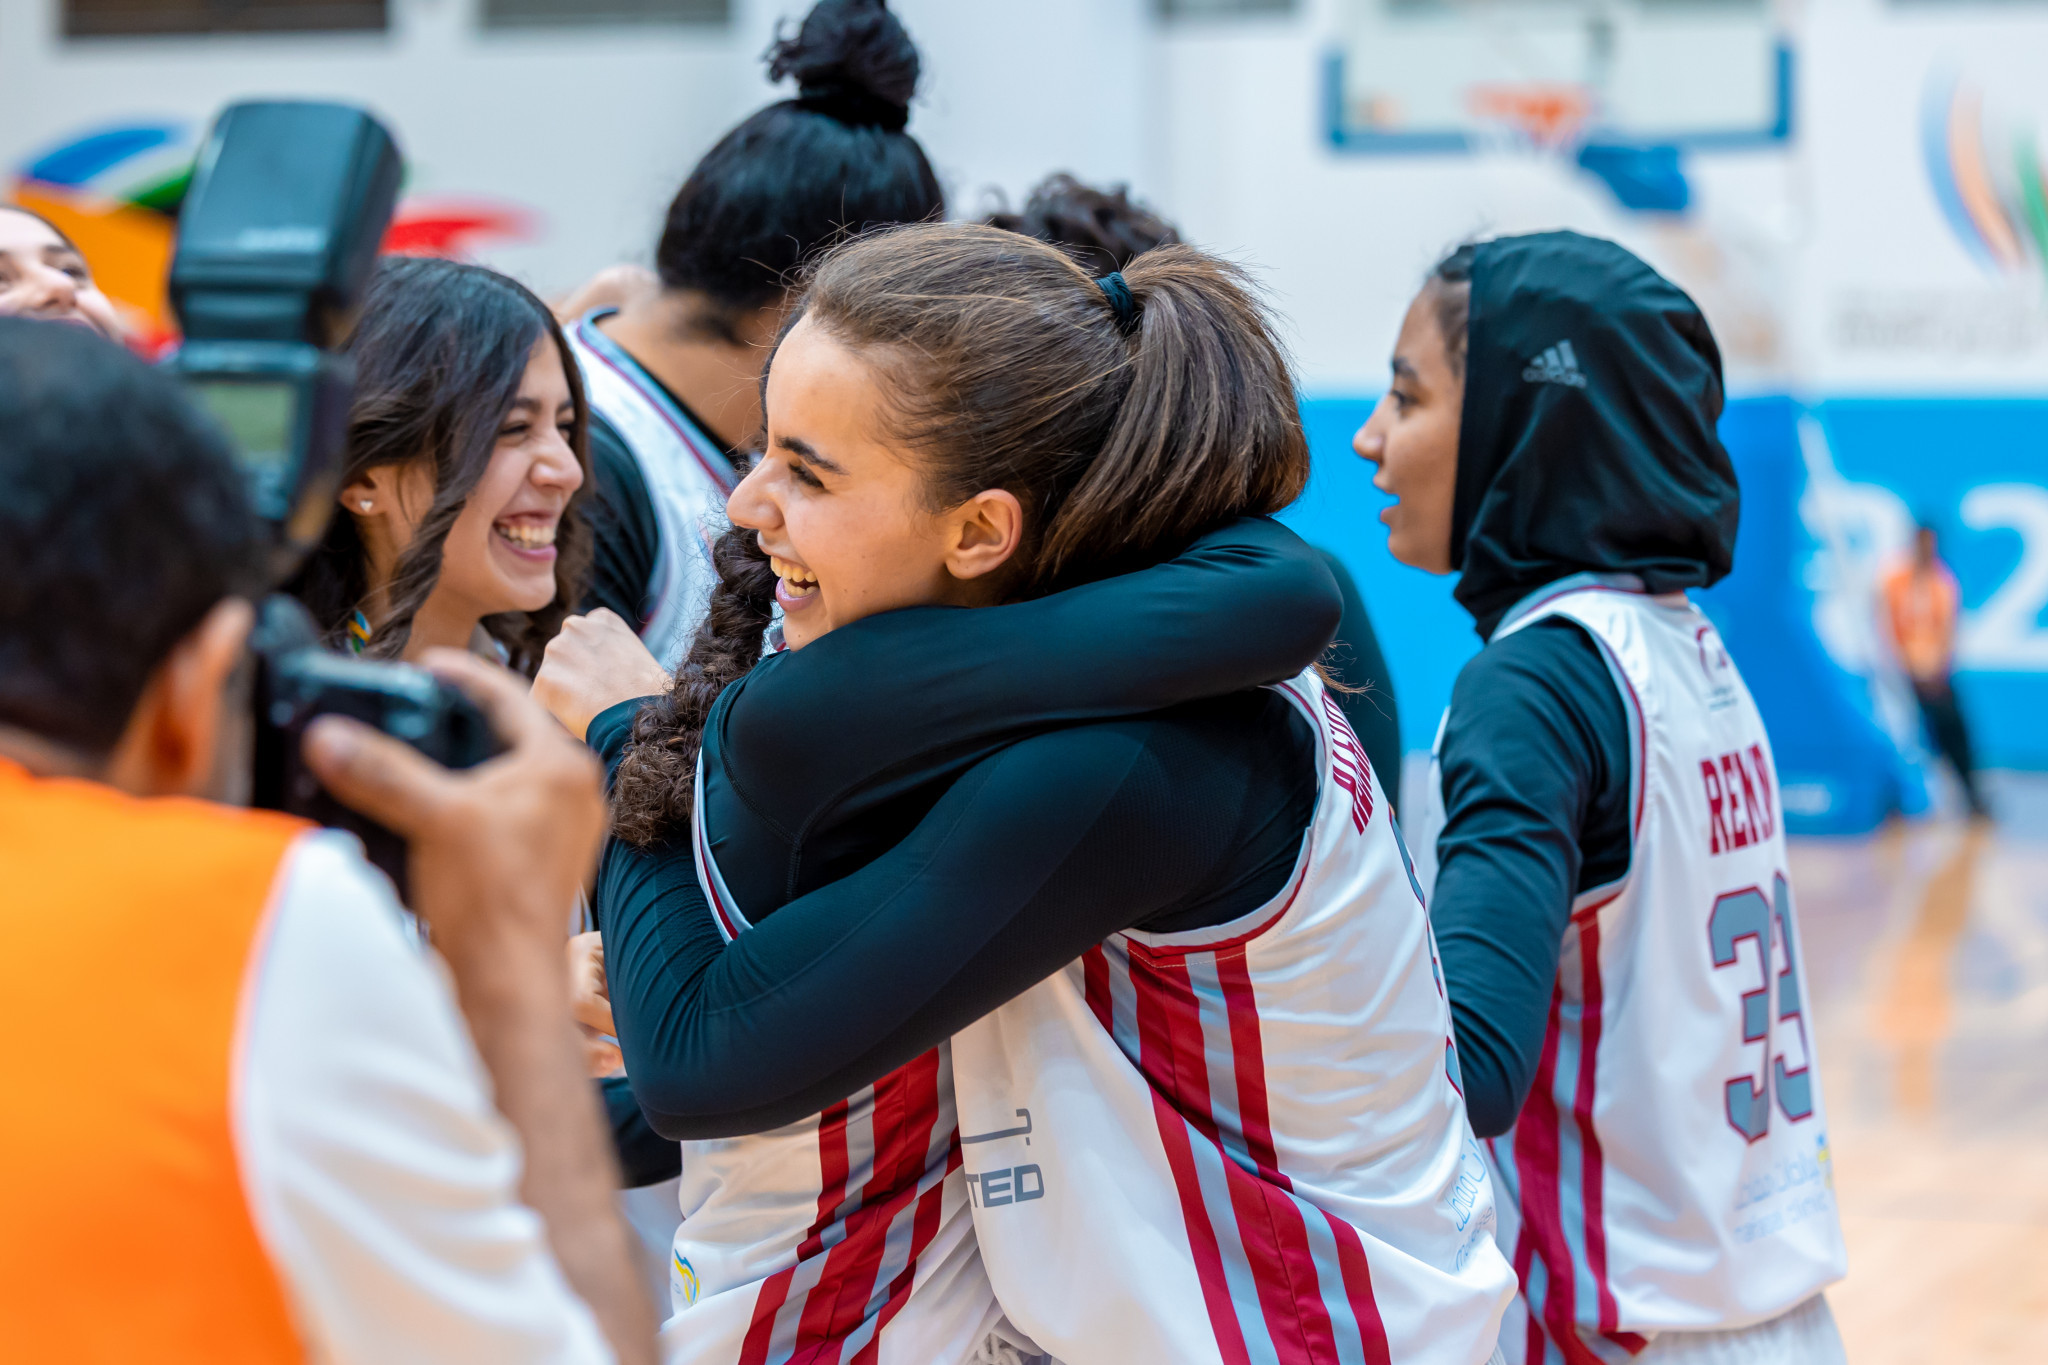 Jeddah United claimed victory today in women's basketball ©Saudi Games